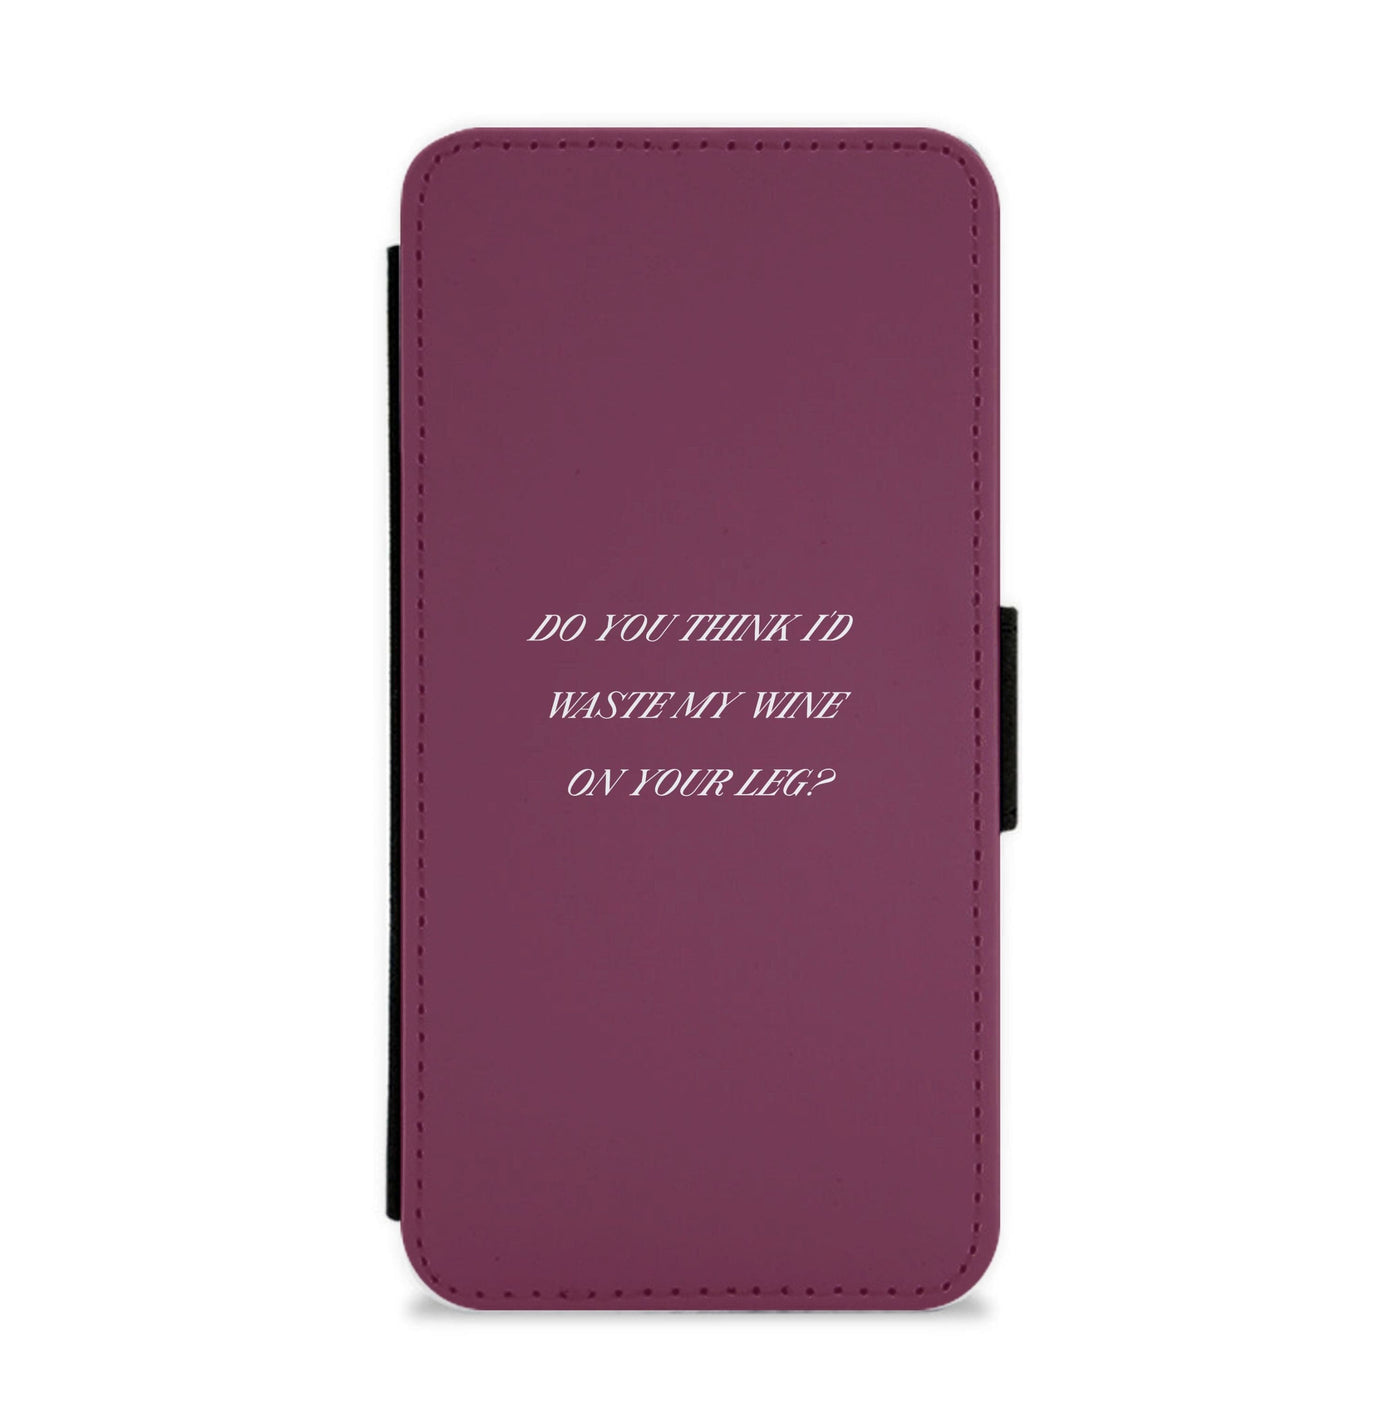 Do You Think I'd Waste My Wine On Your Leg? - Islanders Flip / Wallet Phone Case